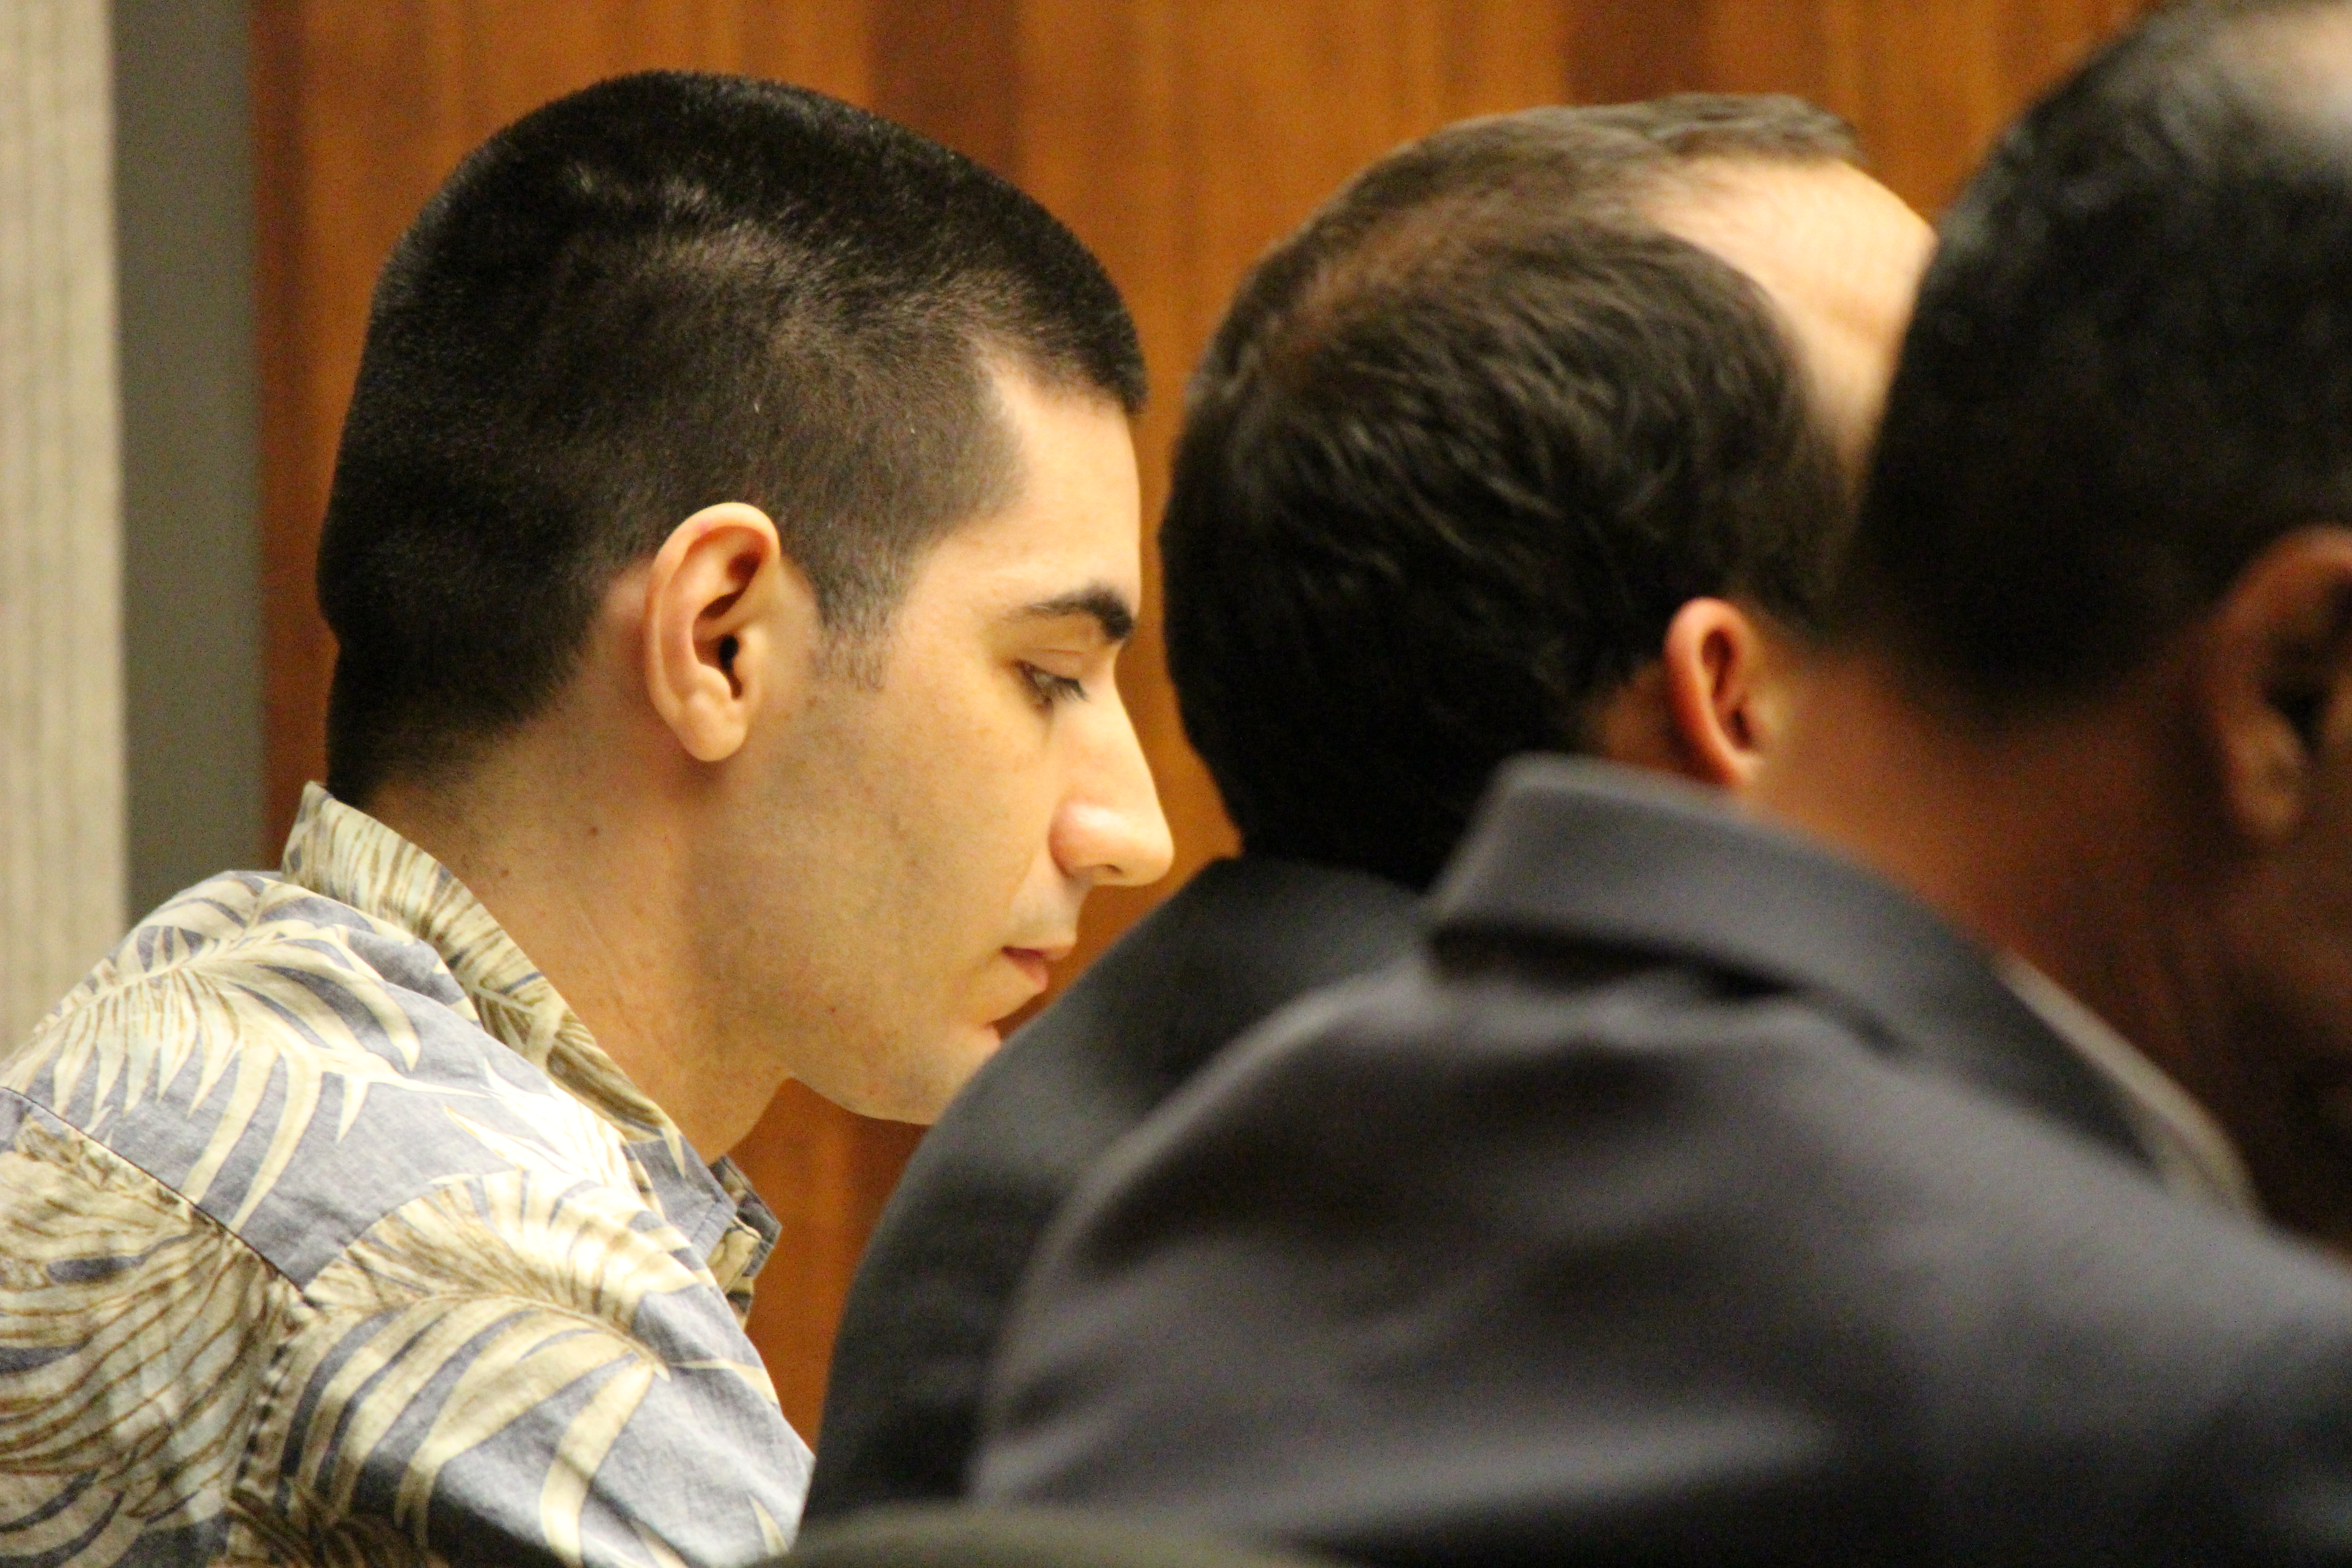 State v Capobianco trail. Defense Attorney Jon Apo in foreground (right) with fellow defense attorney Matthew Nardi (left) and defendant Steven Capobianco (background middle) . PC: 12.01.16 by Wendy Osher.